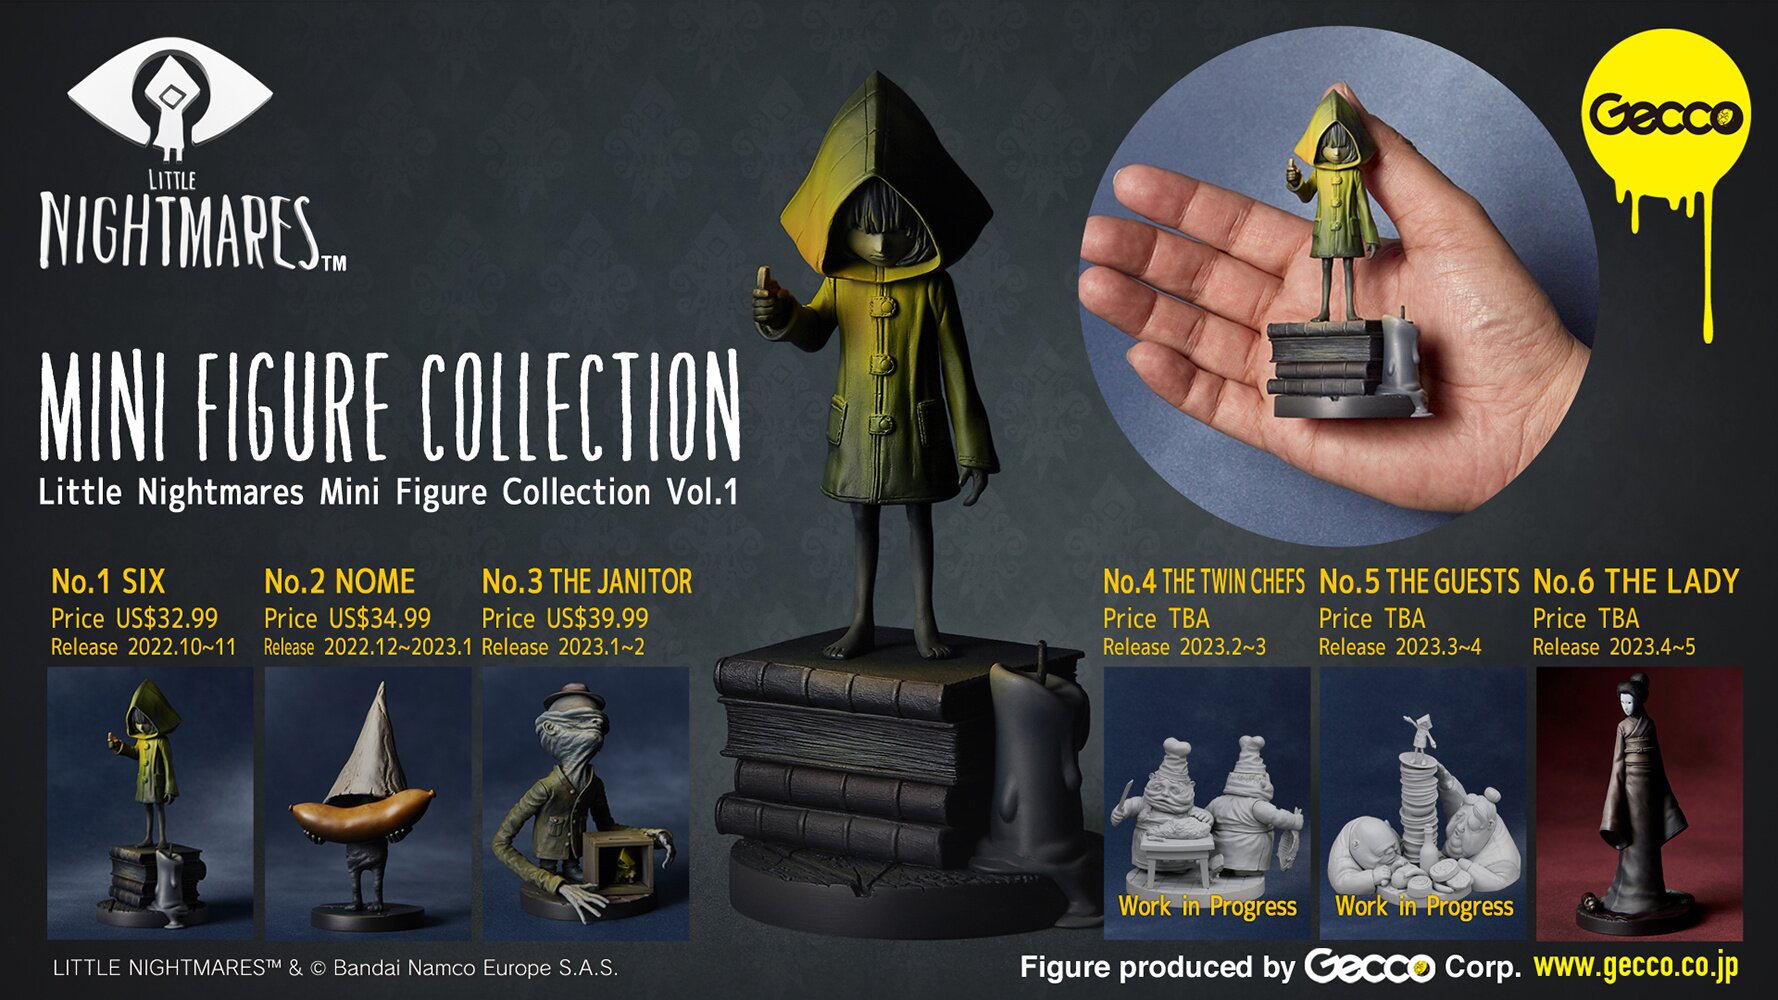 Little Nightmares Mini Figure Collection – The Twin Chefs by Gecco